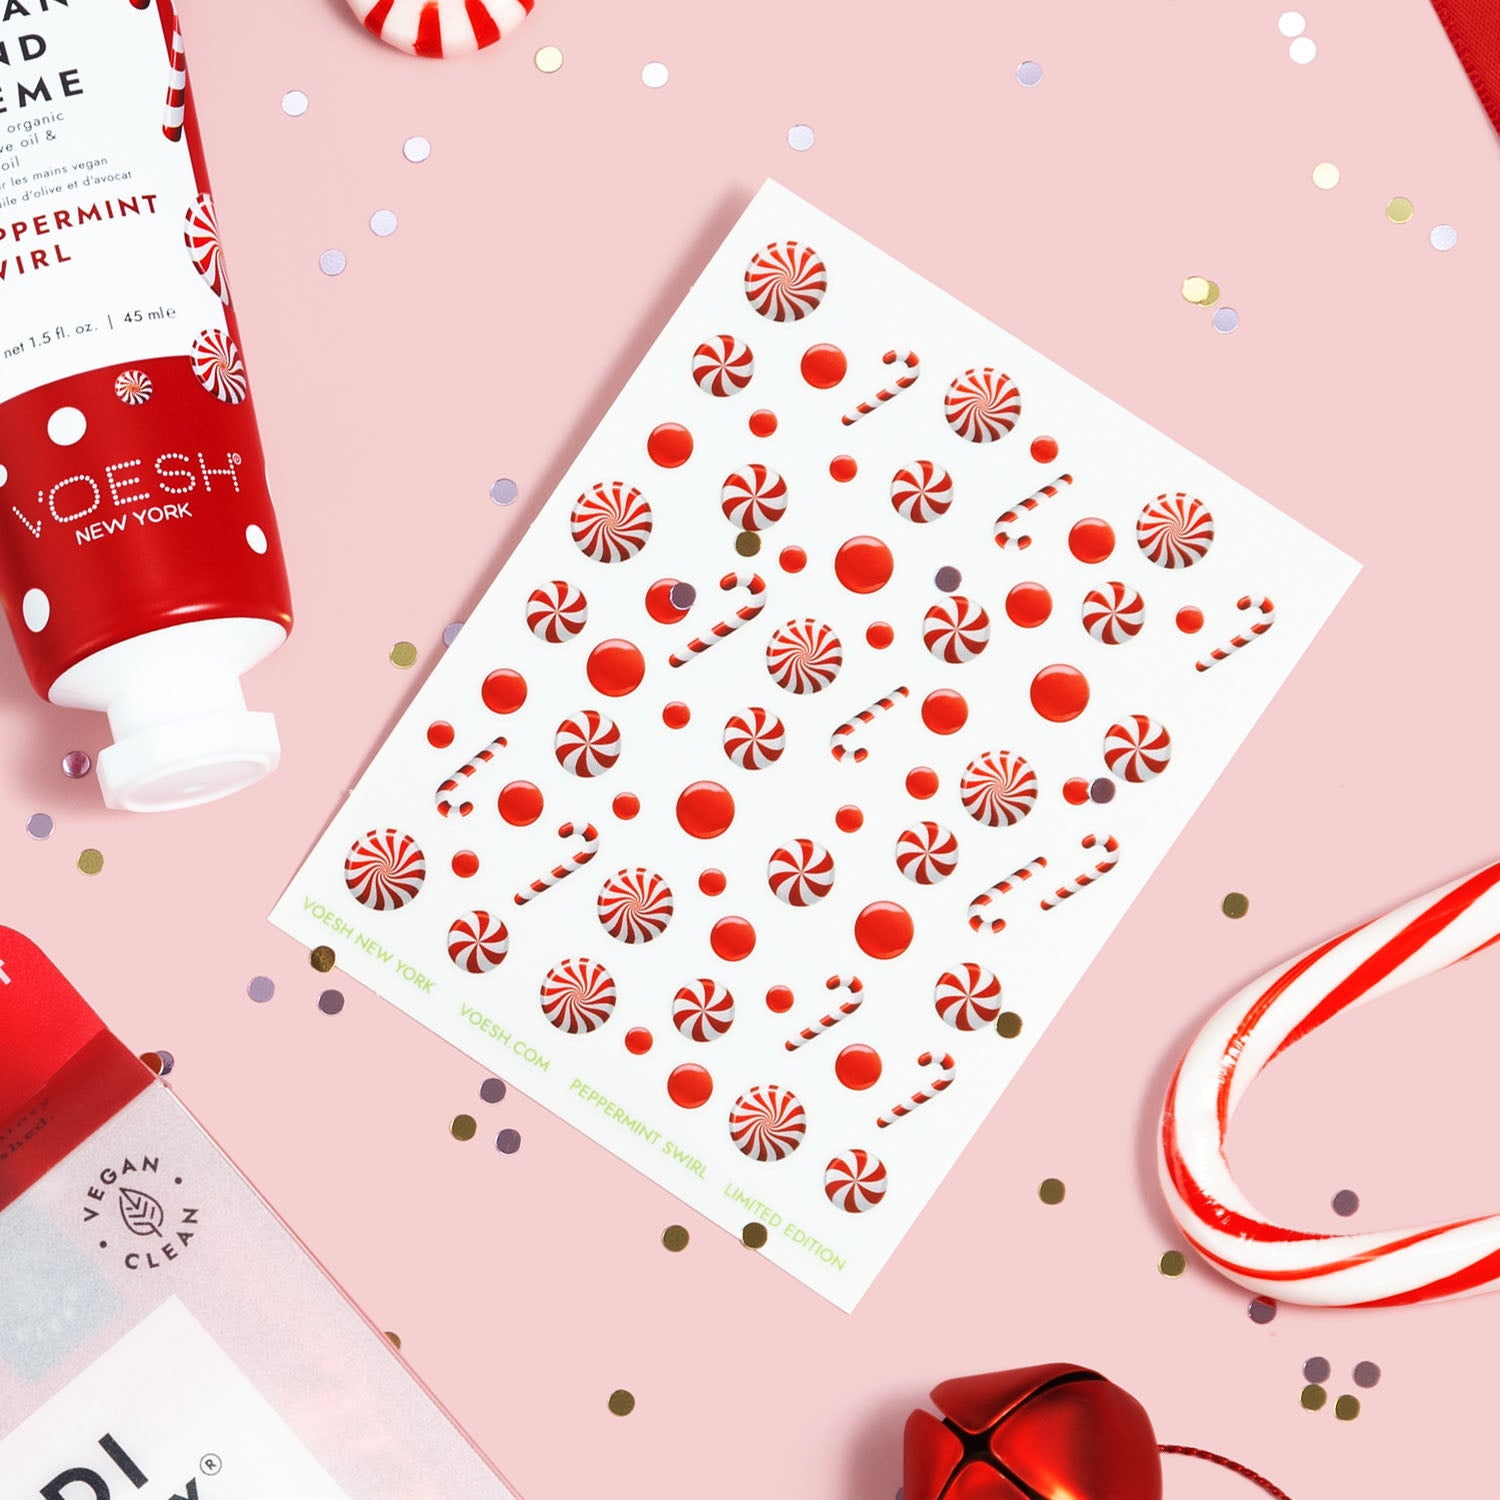 One sheet of Peppermint Swirl Nail Art Stickers next to Peppermint Swirl Vegan Hand Crème on a pink background with confetti, bells, and candy canes.